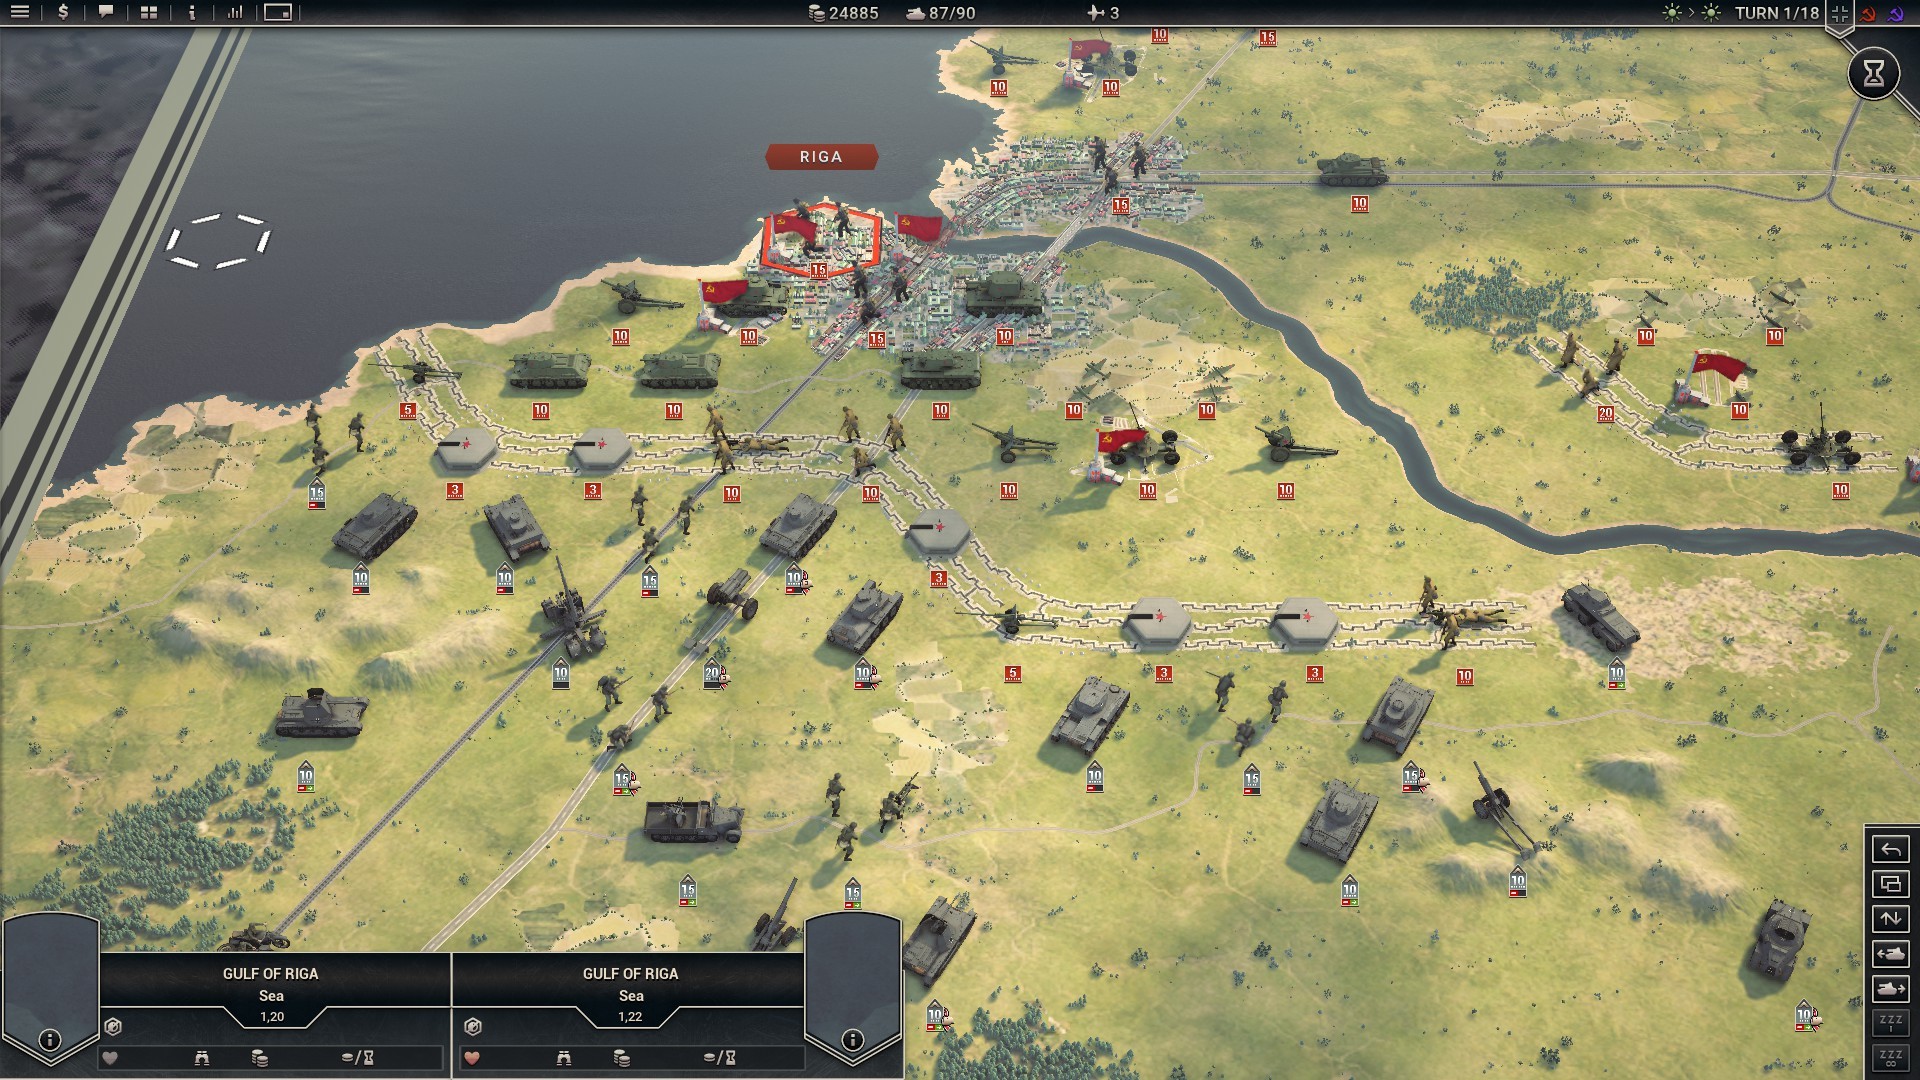 Panzer Corps 2 - Axis Operations 1941 DLC Steam CD Key 4.4 usd